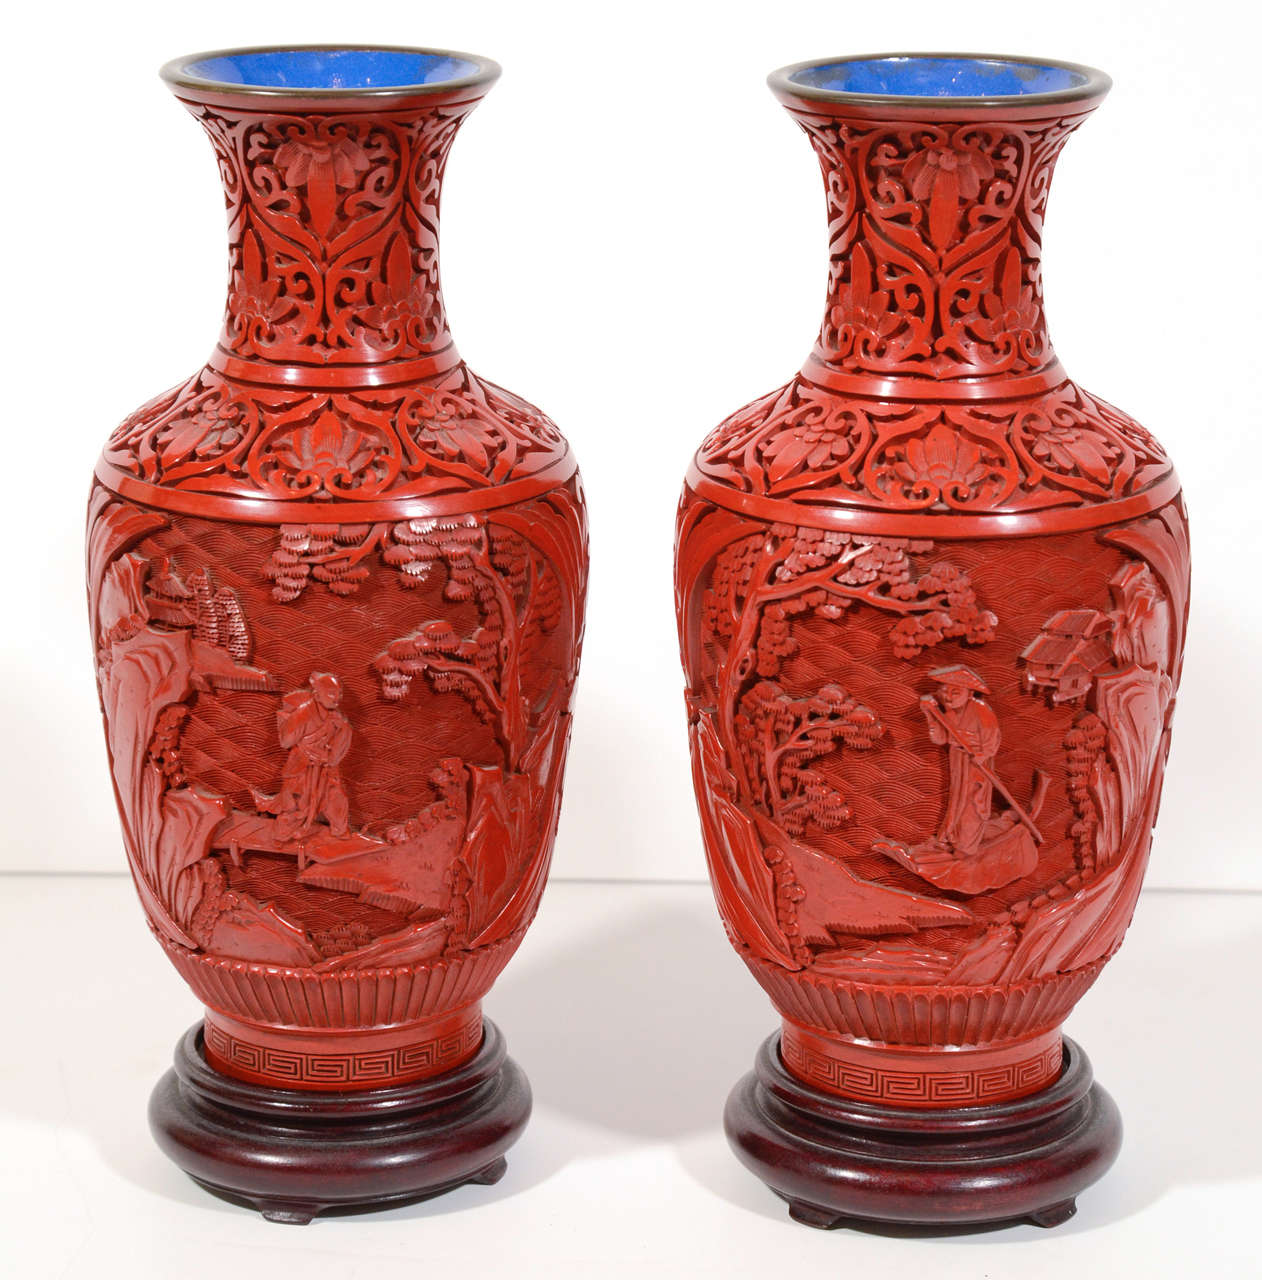 Pair of fine hand made Chinese porcelain vases with red lacquered (cinnabar) exteriors. The vases feature carefully hand crafted Asian sceneries and motifs and have blue glazed interiors with bronze trimmed borders. Also includes hand carved wooden